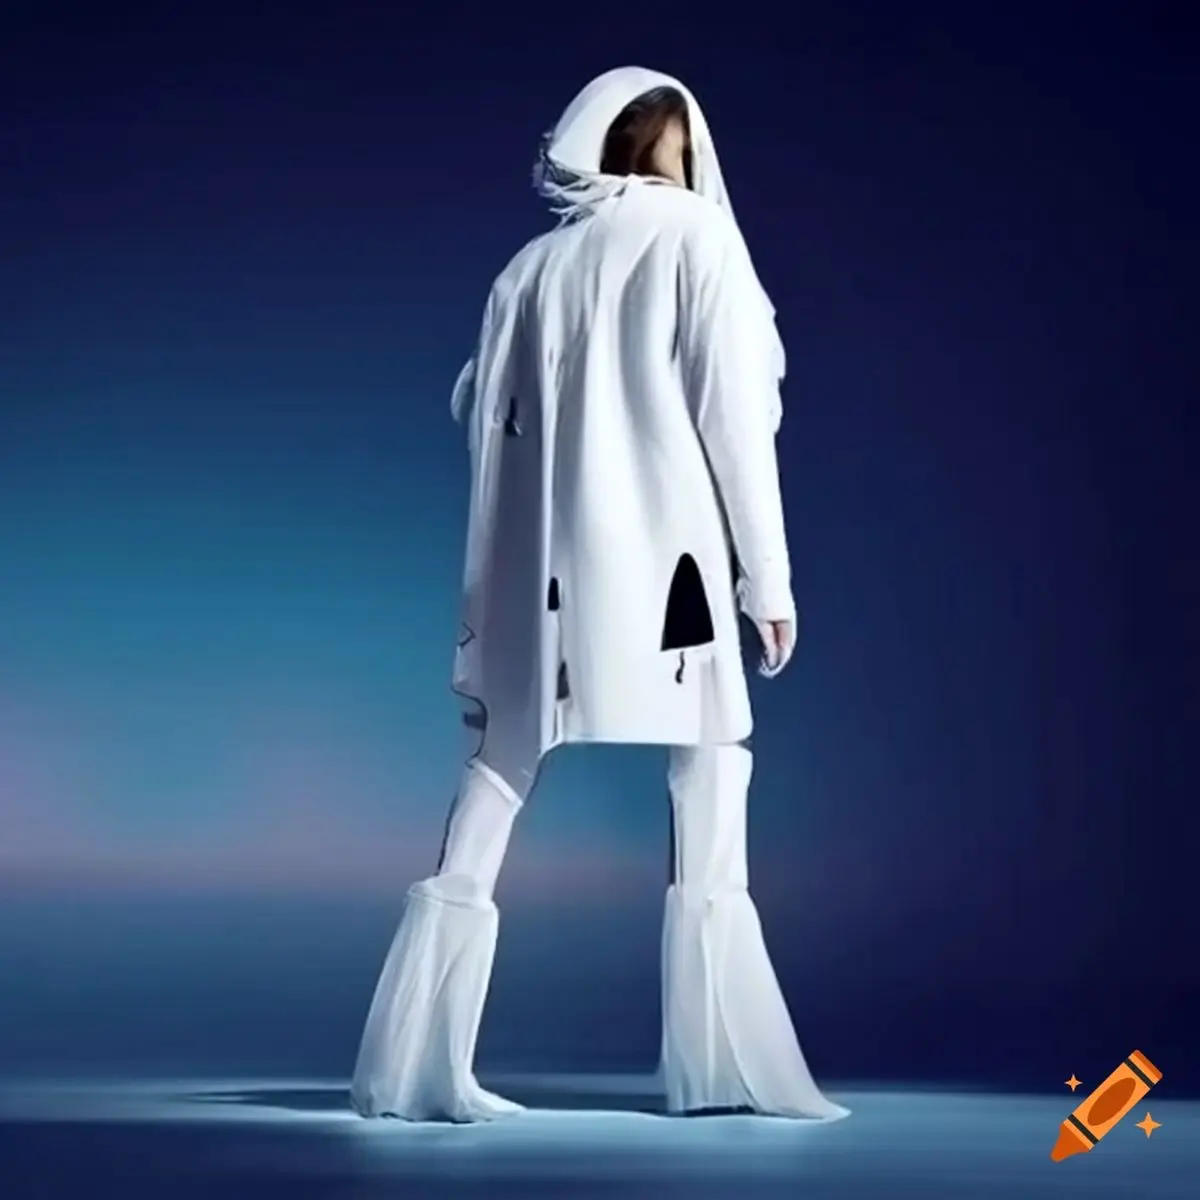 craiyon_104346_highly_detailed_futuristic_fashion_for_space_travel__white__clean_garments